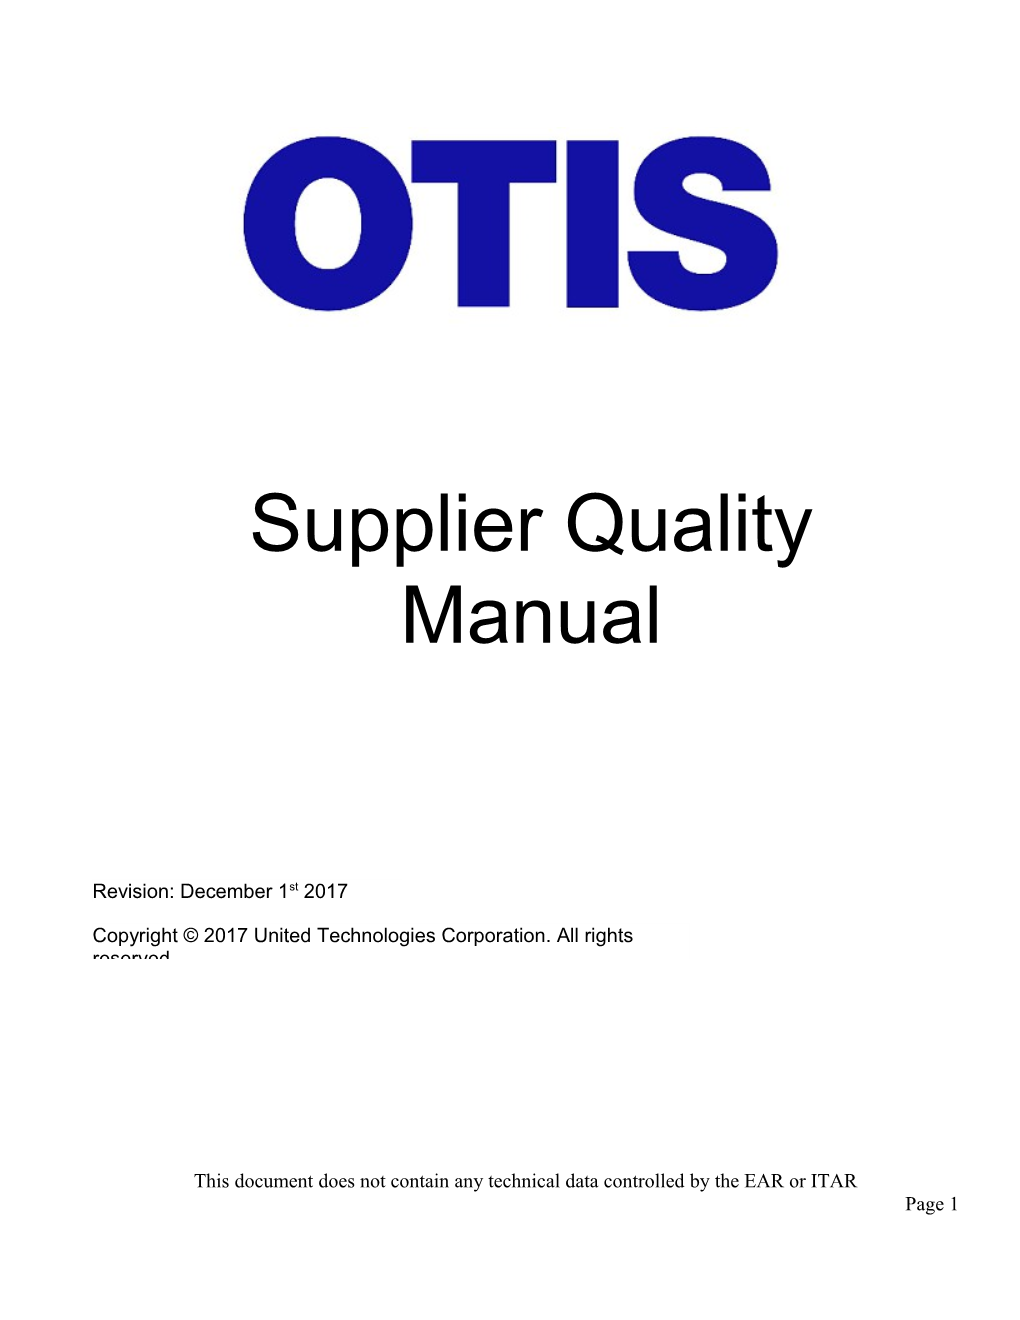 Supplier Quality Policy